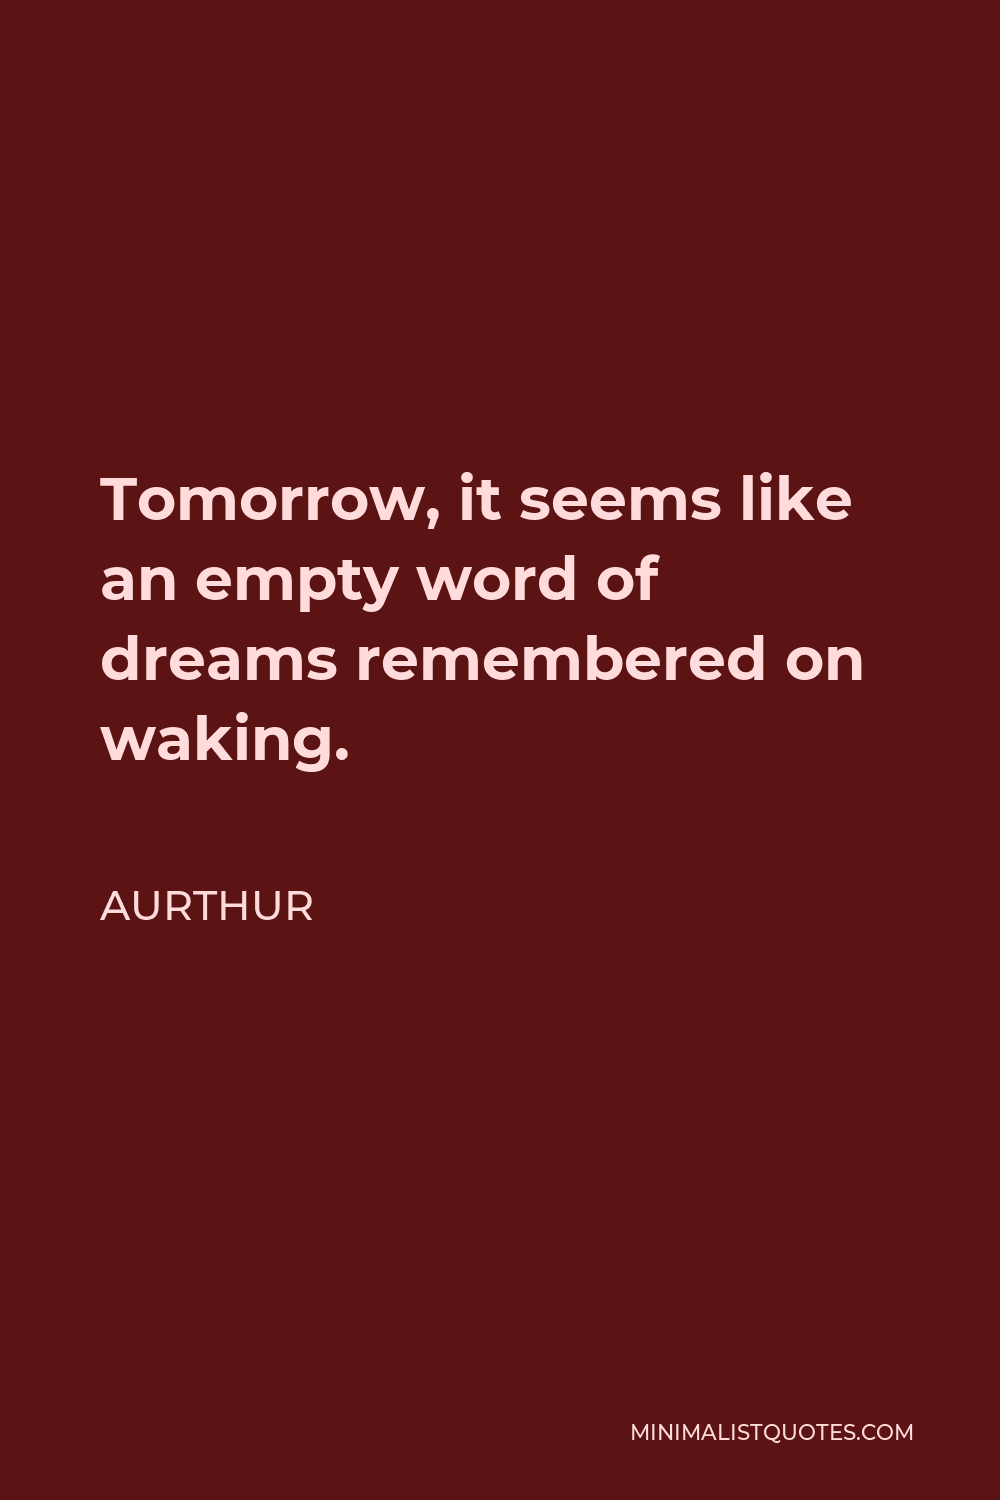 Aurthur Quote - Tomorrow, it seems like an empty word of dreams remembered on waking.